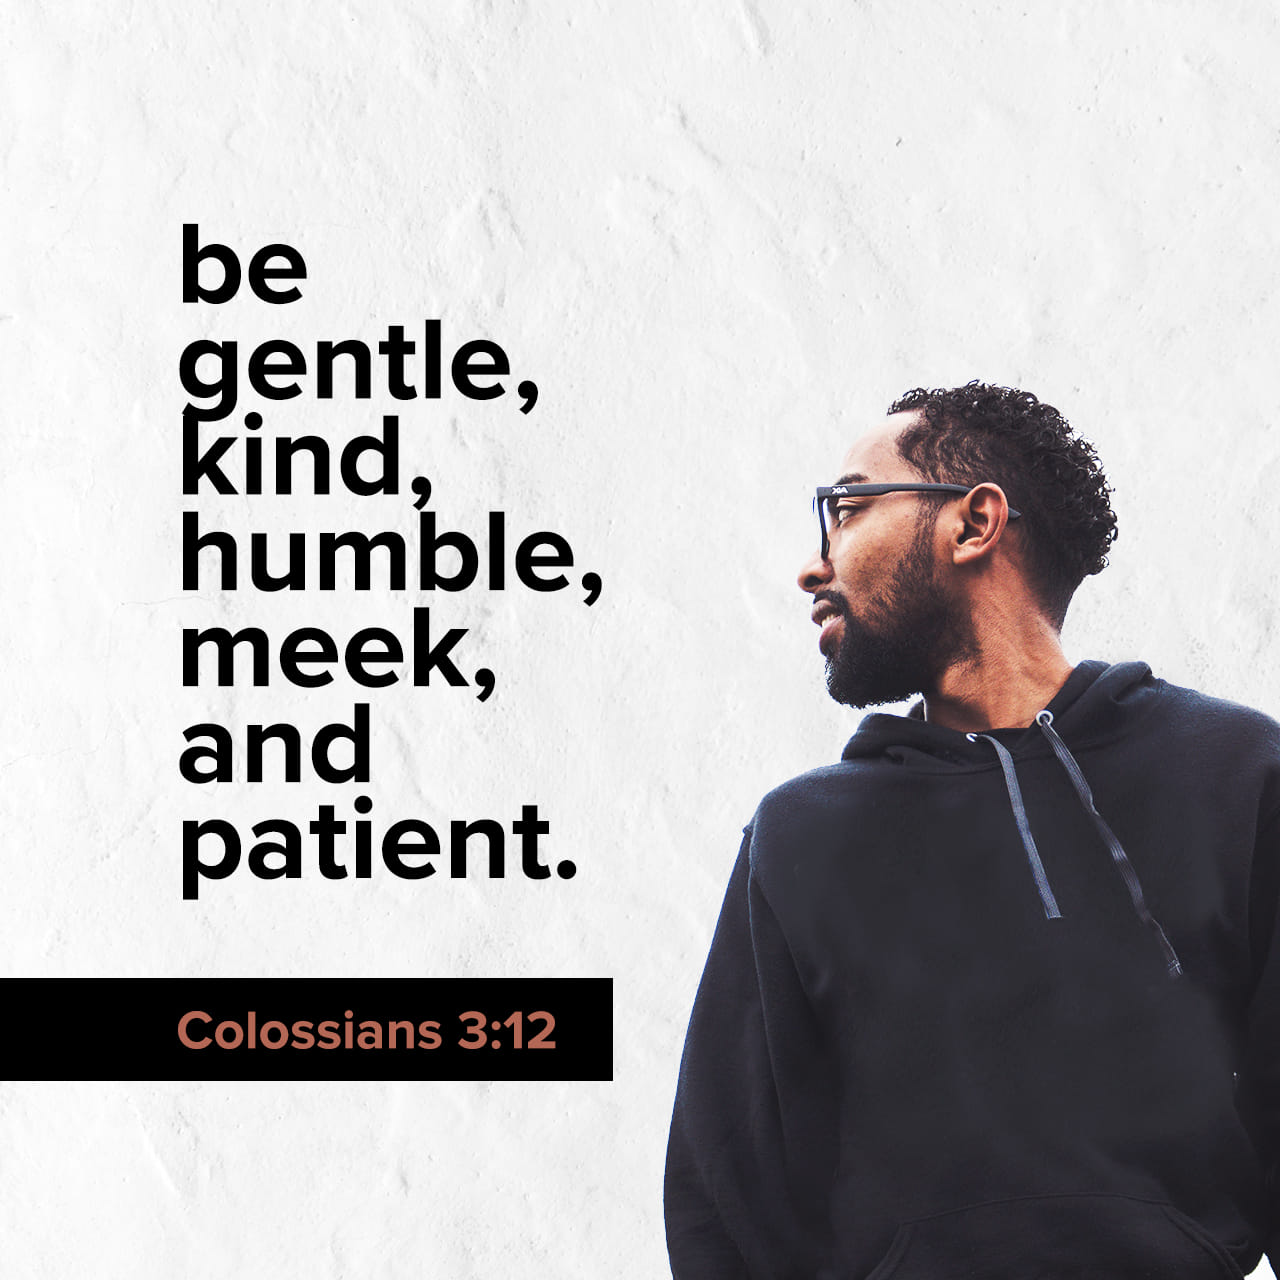 Bible Verse of the Day - day 214 - image 42328 (Colossians 3:12)